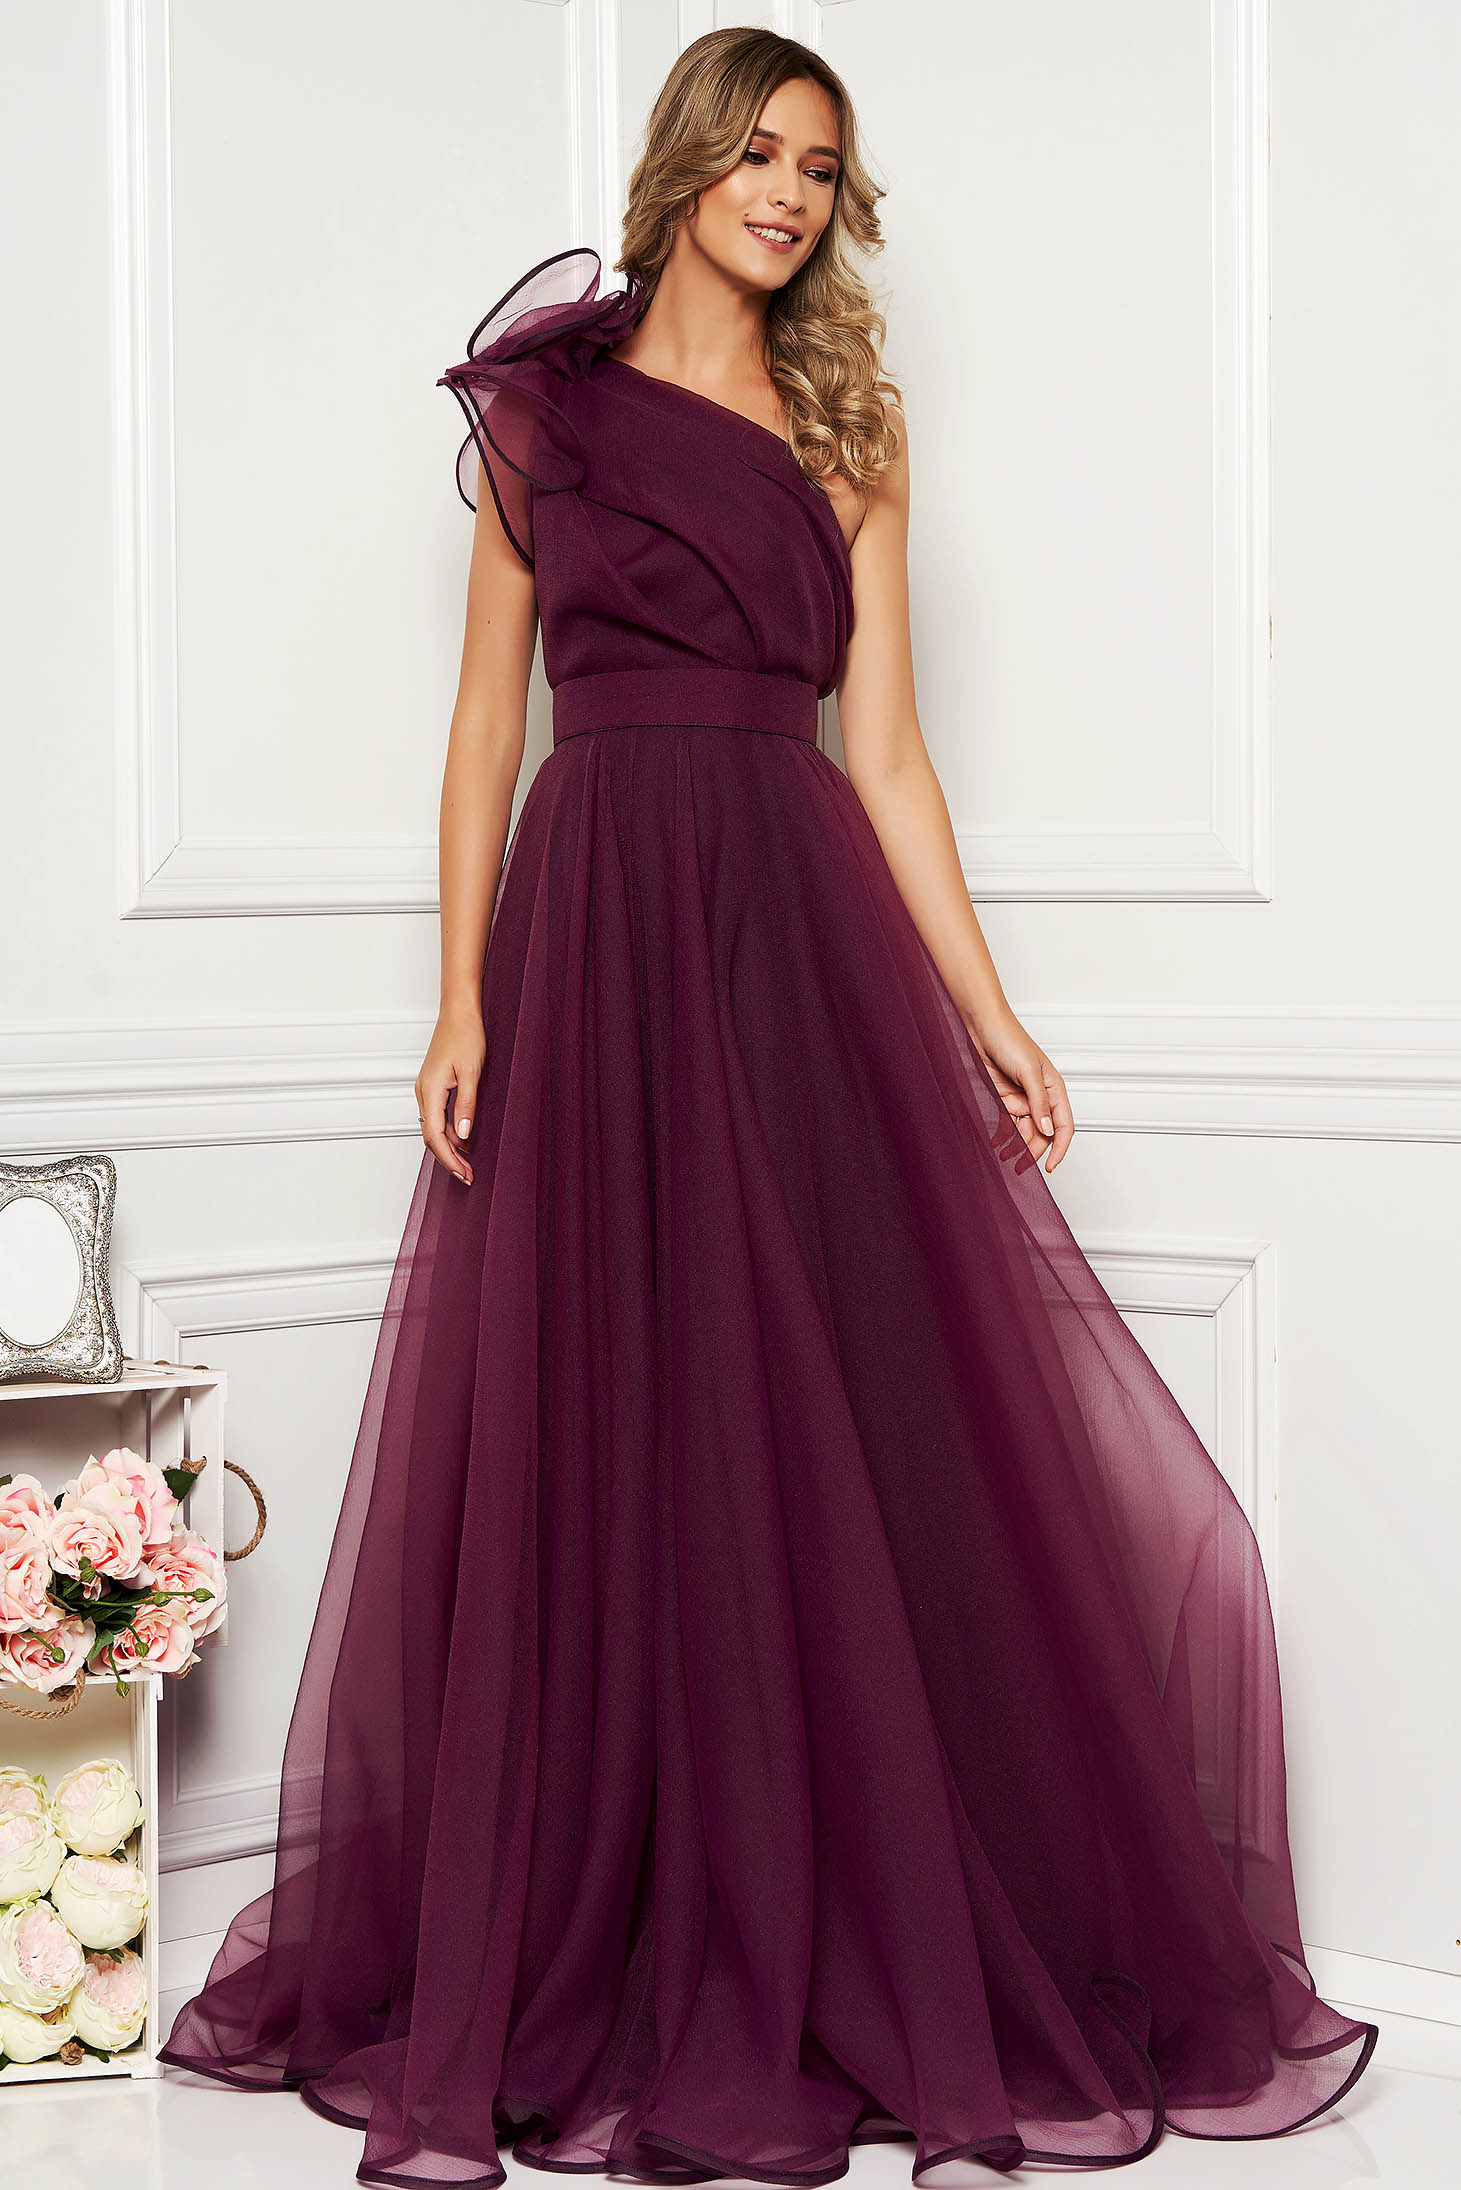 Ana Radu purple luxurious dress with inside lining accessorized with tied waistband one shoulder flaring cut